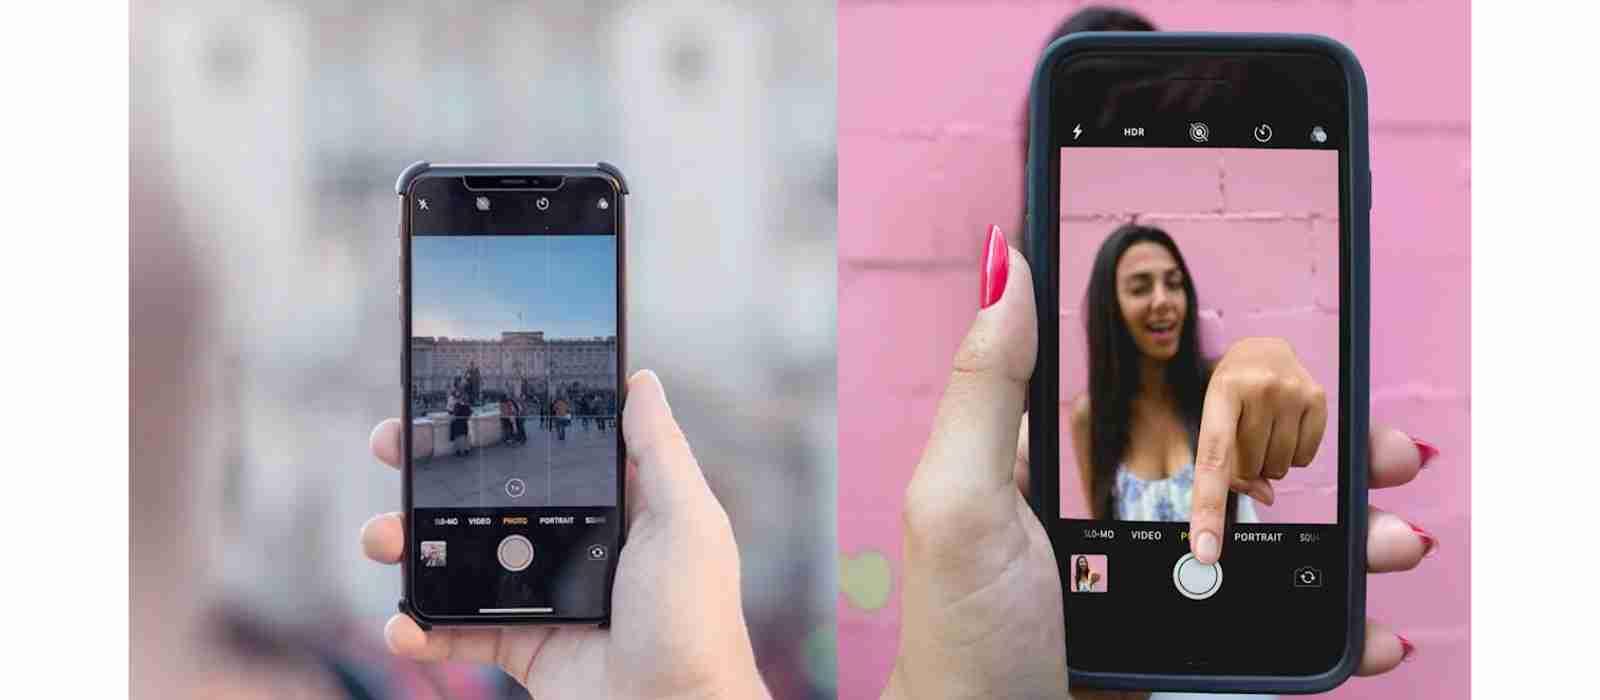 7-Steps On How To Take A Professional Headshot With An iPhone?